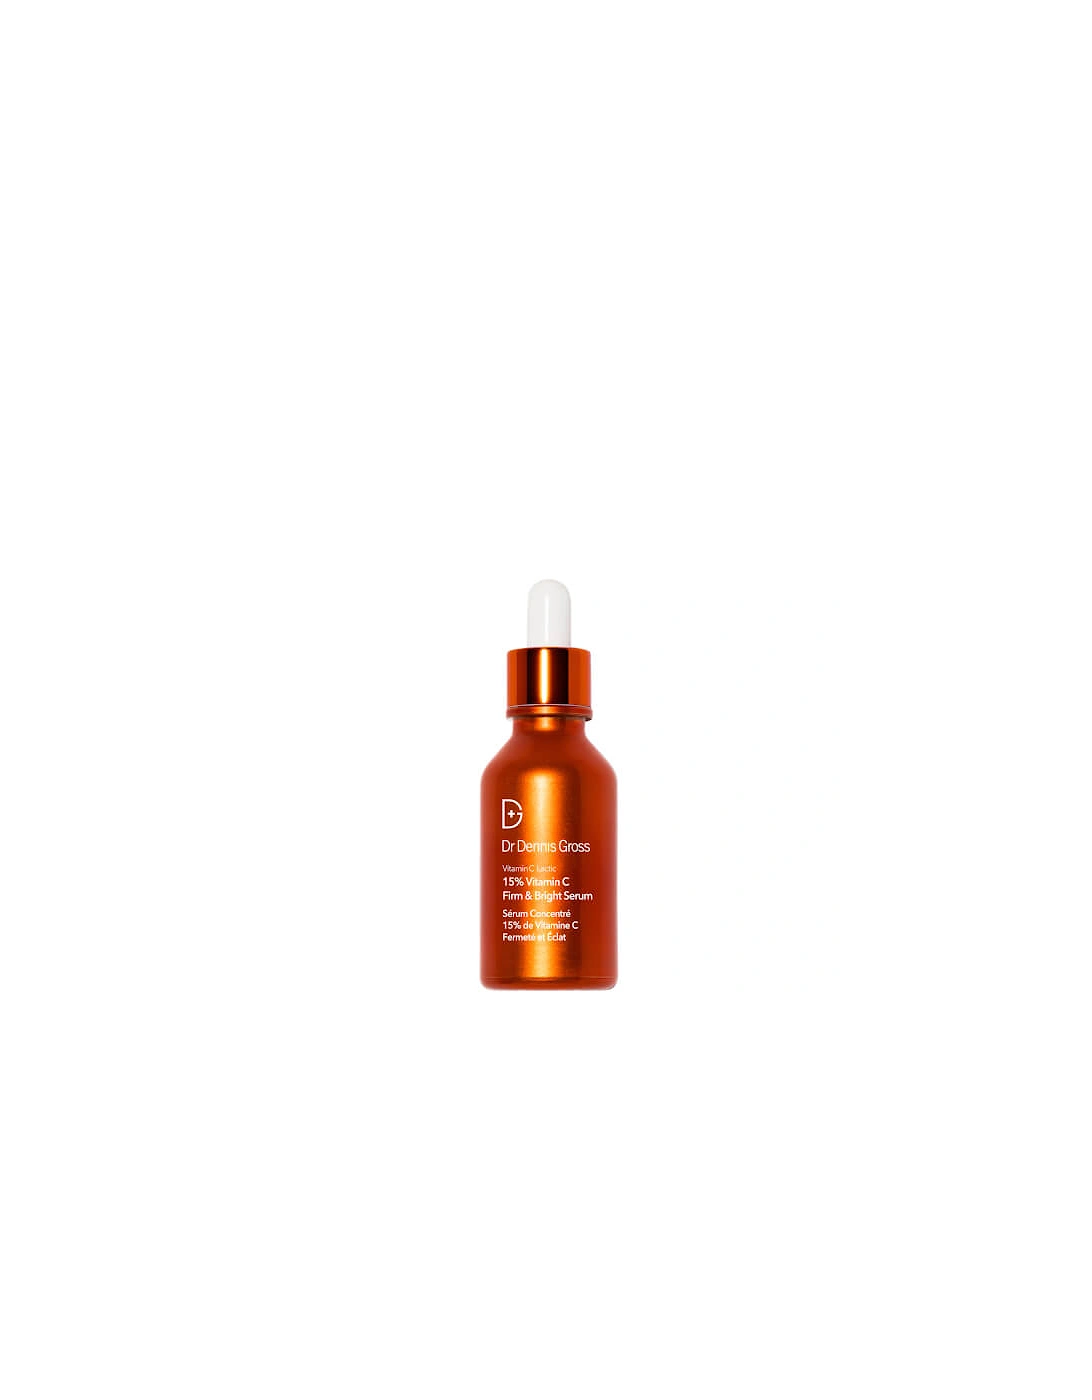 Vitamin C and Lactic 15% Vitamin C Firm and Bright Serum 30ml - Dr Dennis Gross, 2 of 1